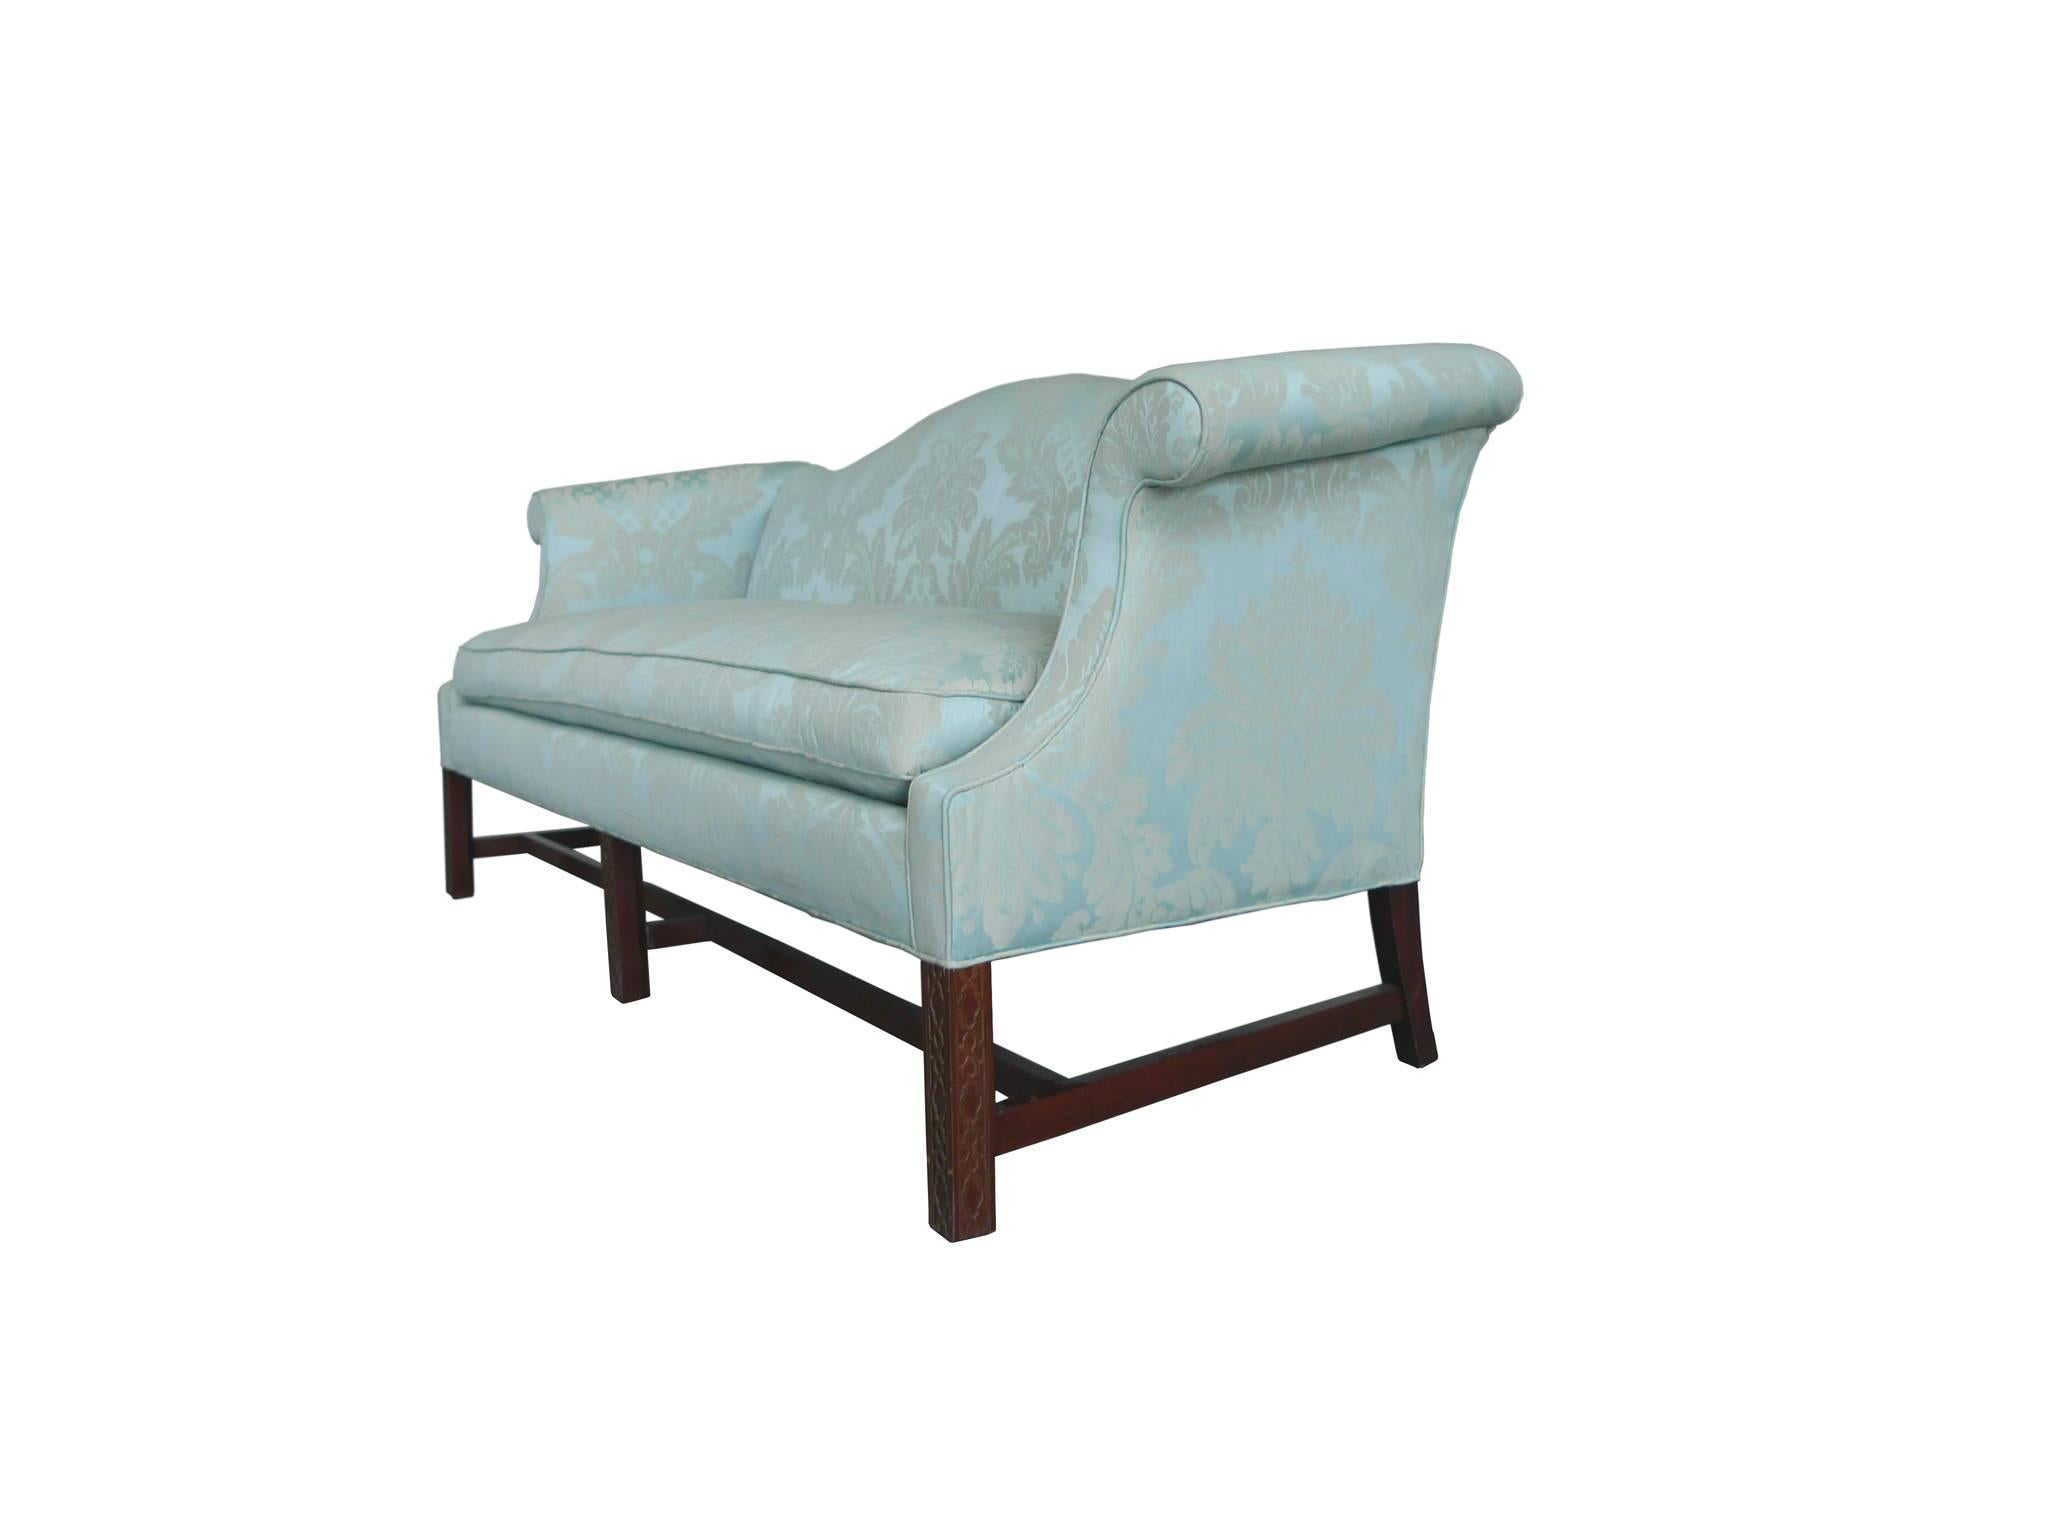 This 20th century sofa is in the Chinese Chippendale style. It's reupholstered in a stunning blue damask silk. The sofa's design includes a camelback, scrolled armrests, and soft edges with piping. The three front legs have a trellis design, while